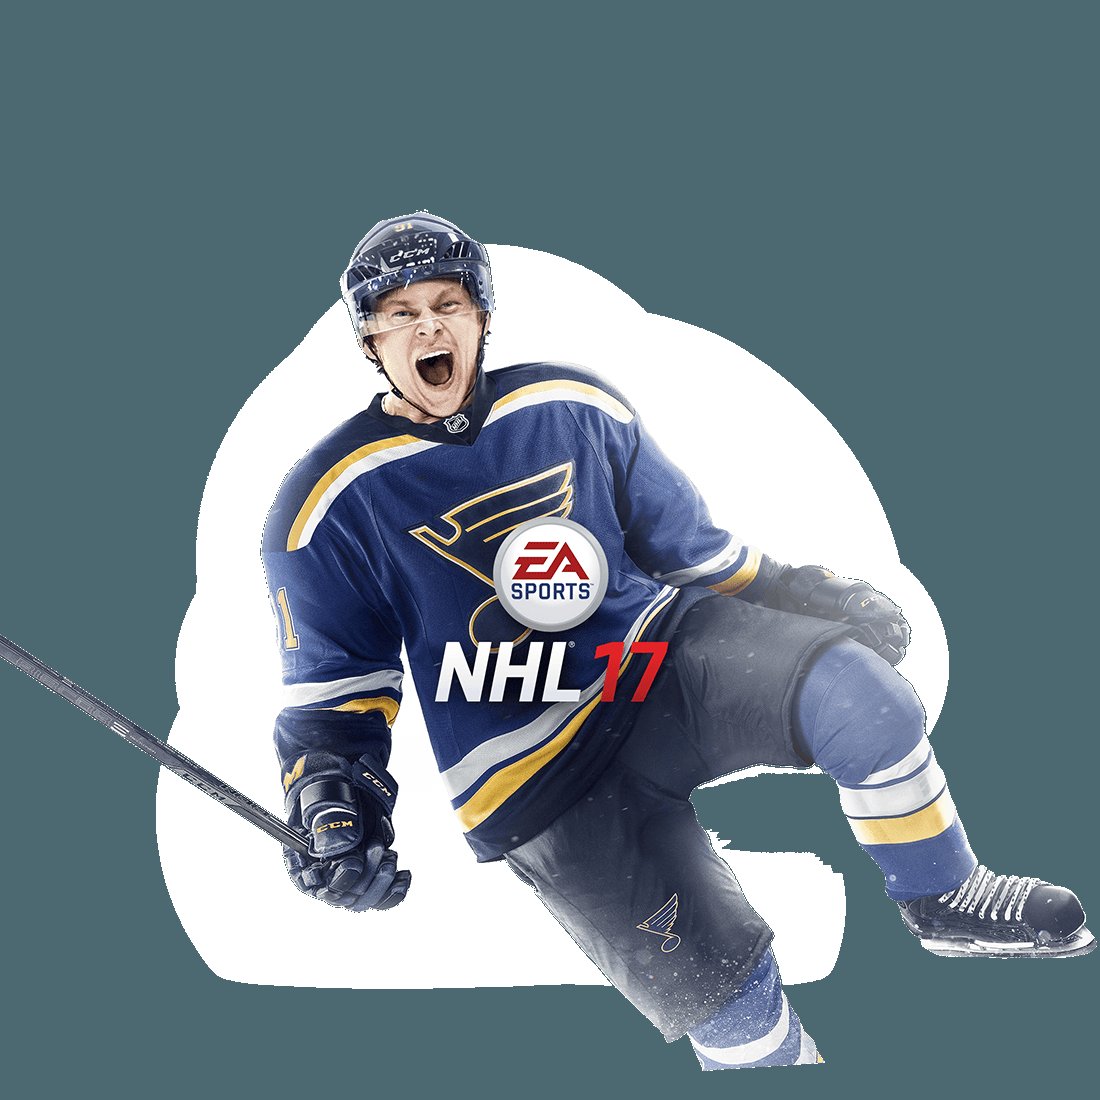 Nhl 17 WAGGER (@nhl17WAGGER) | Twitter